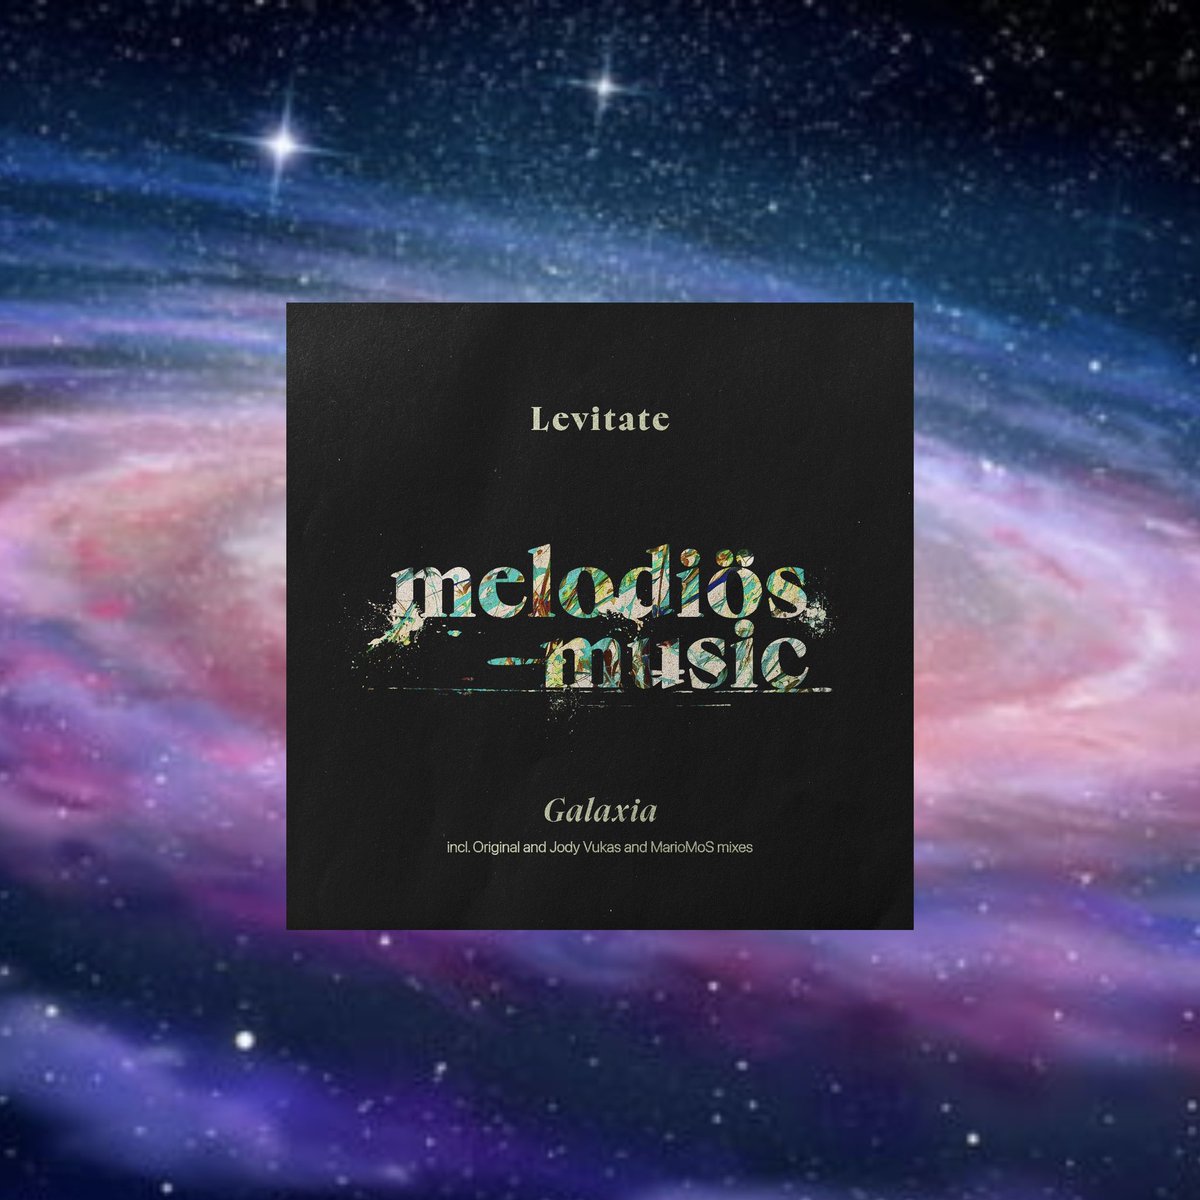 My new single ‘Galaxia’ is out now on @melodiosmusic , along with great remixes from @mariomosmusic & @JodyVukas ! 🙌💫 go.protonradio.com/r/rlhYAaErPtneQ #NewMusic #Levitate #Galaxia #MelodiösMusic #EDM #Rave #ElectroLovers #AnjunaFamily #TranceFamily #TalentoMexicano #ProgressiveHouse